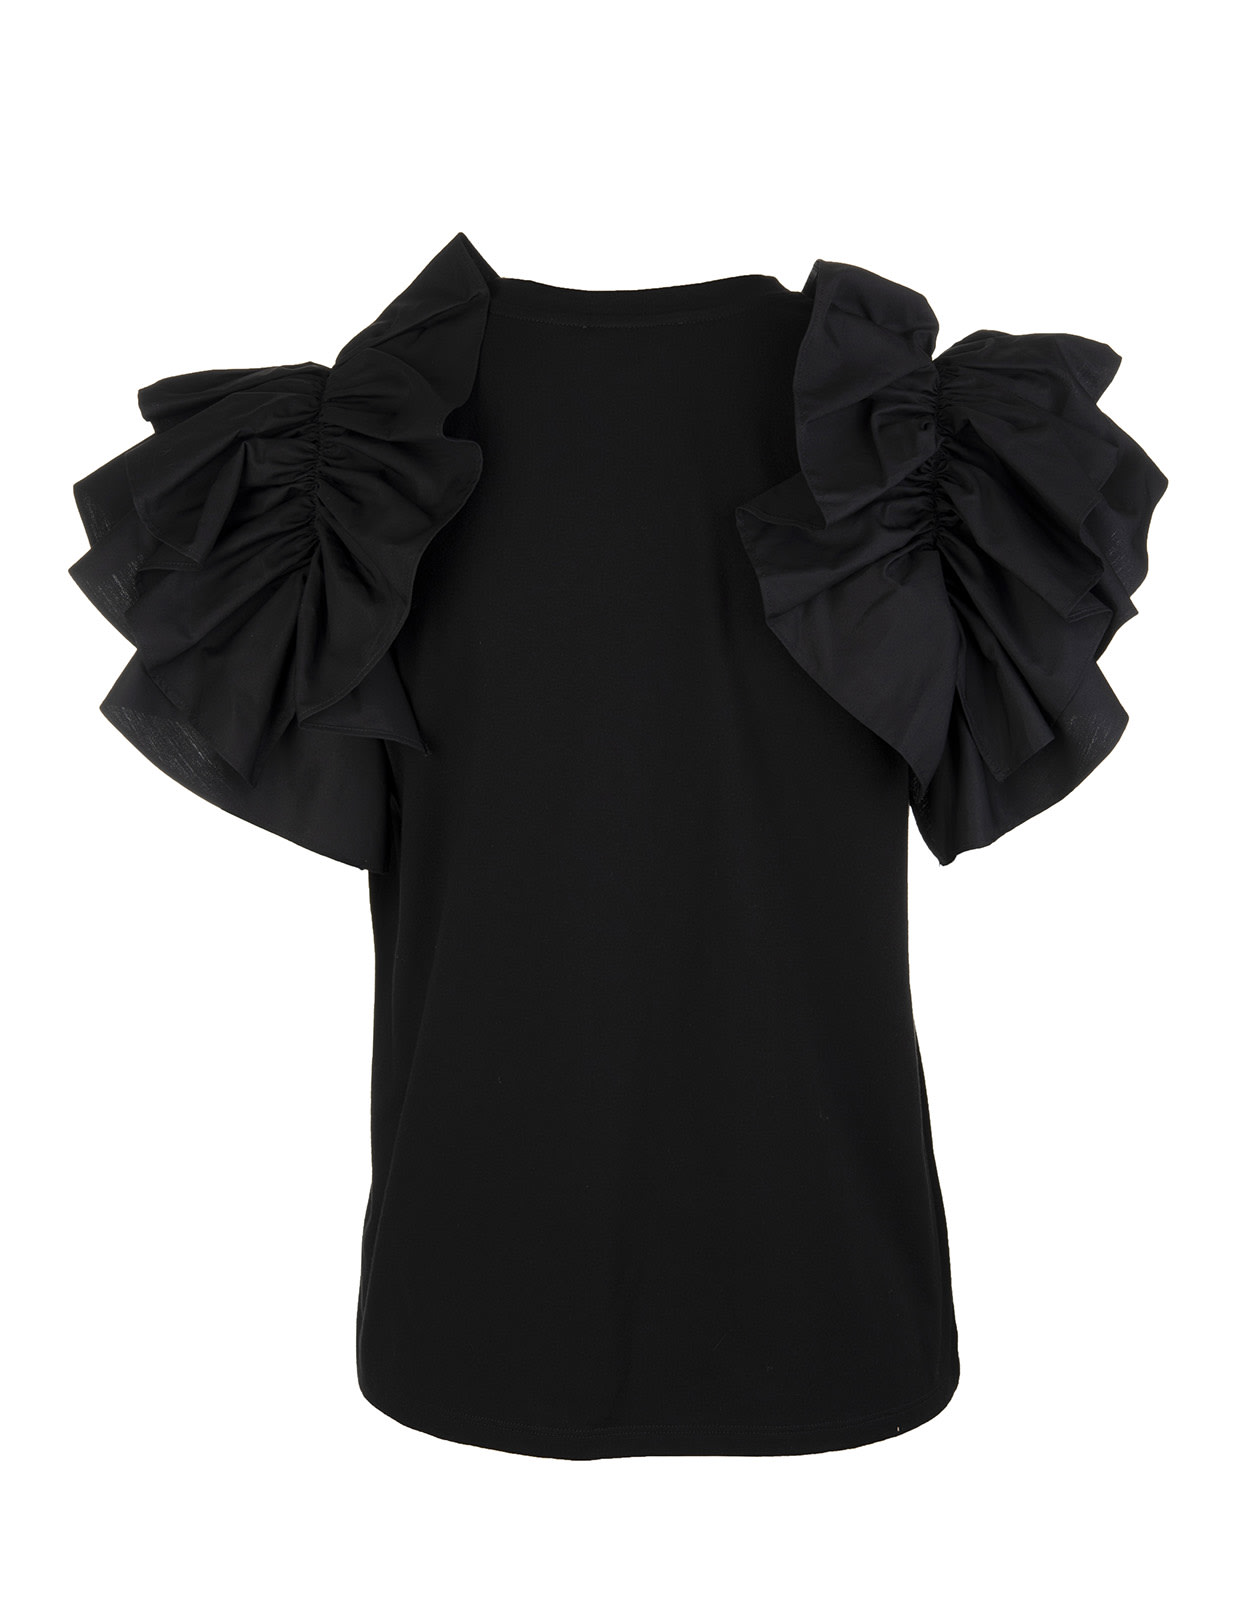 Alexander McQueen Black T-shirt With Bow Sleeves